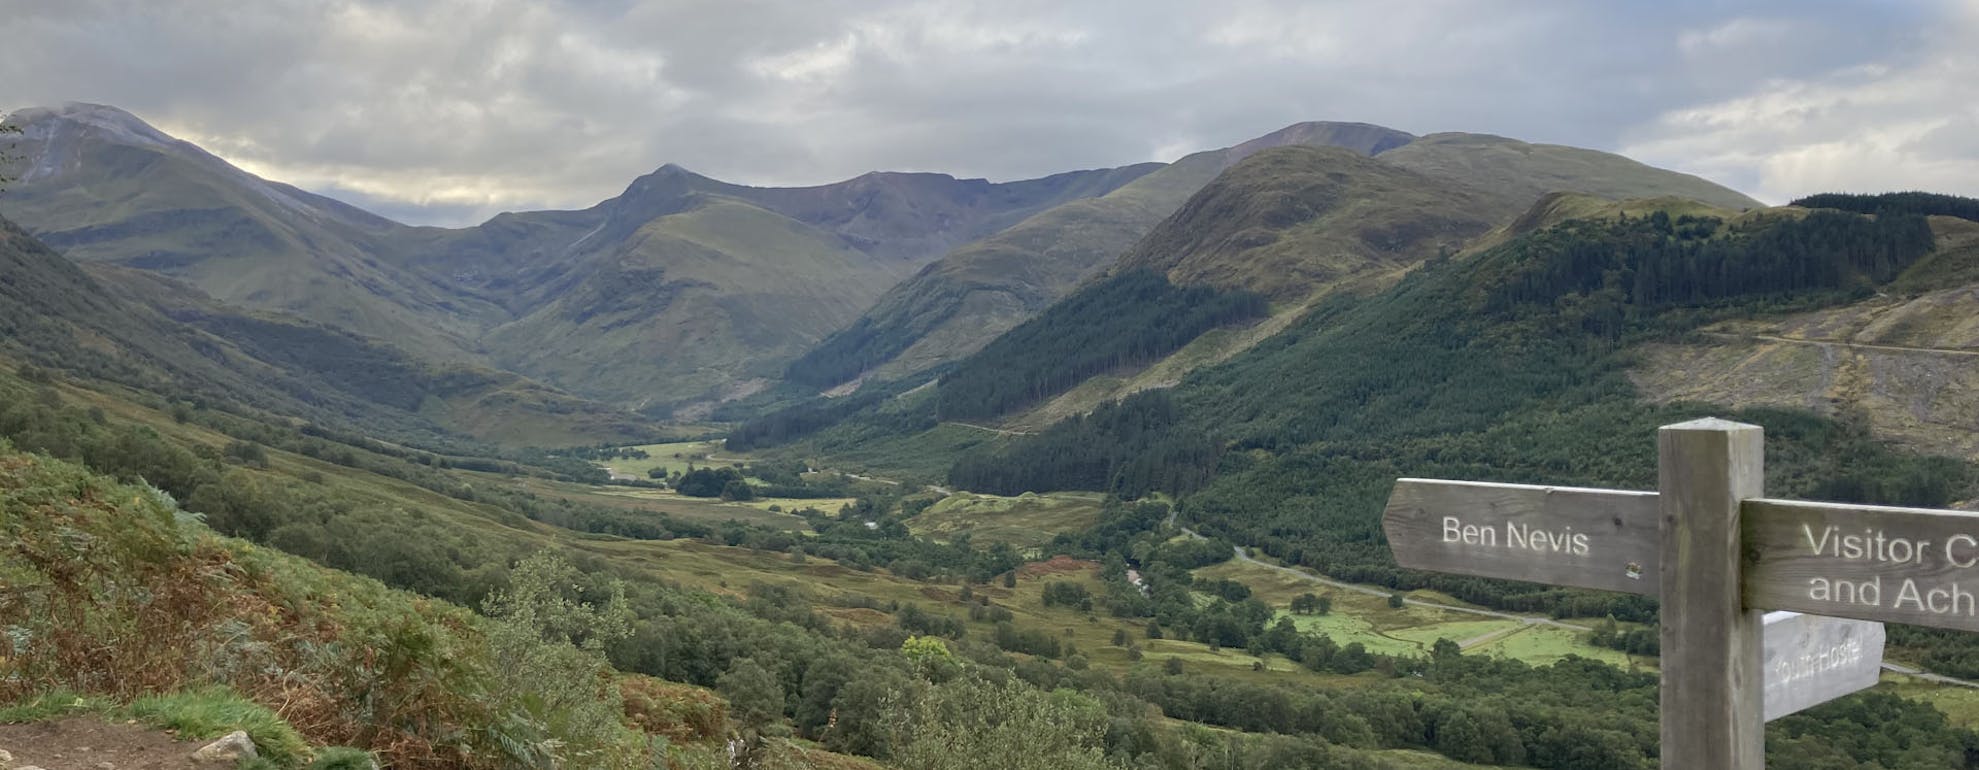 uk-best-walks-and-hikes-part-1-the-west-highland-way